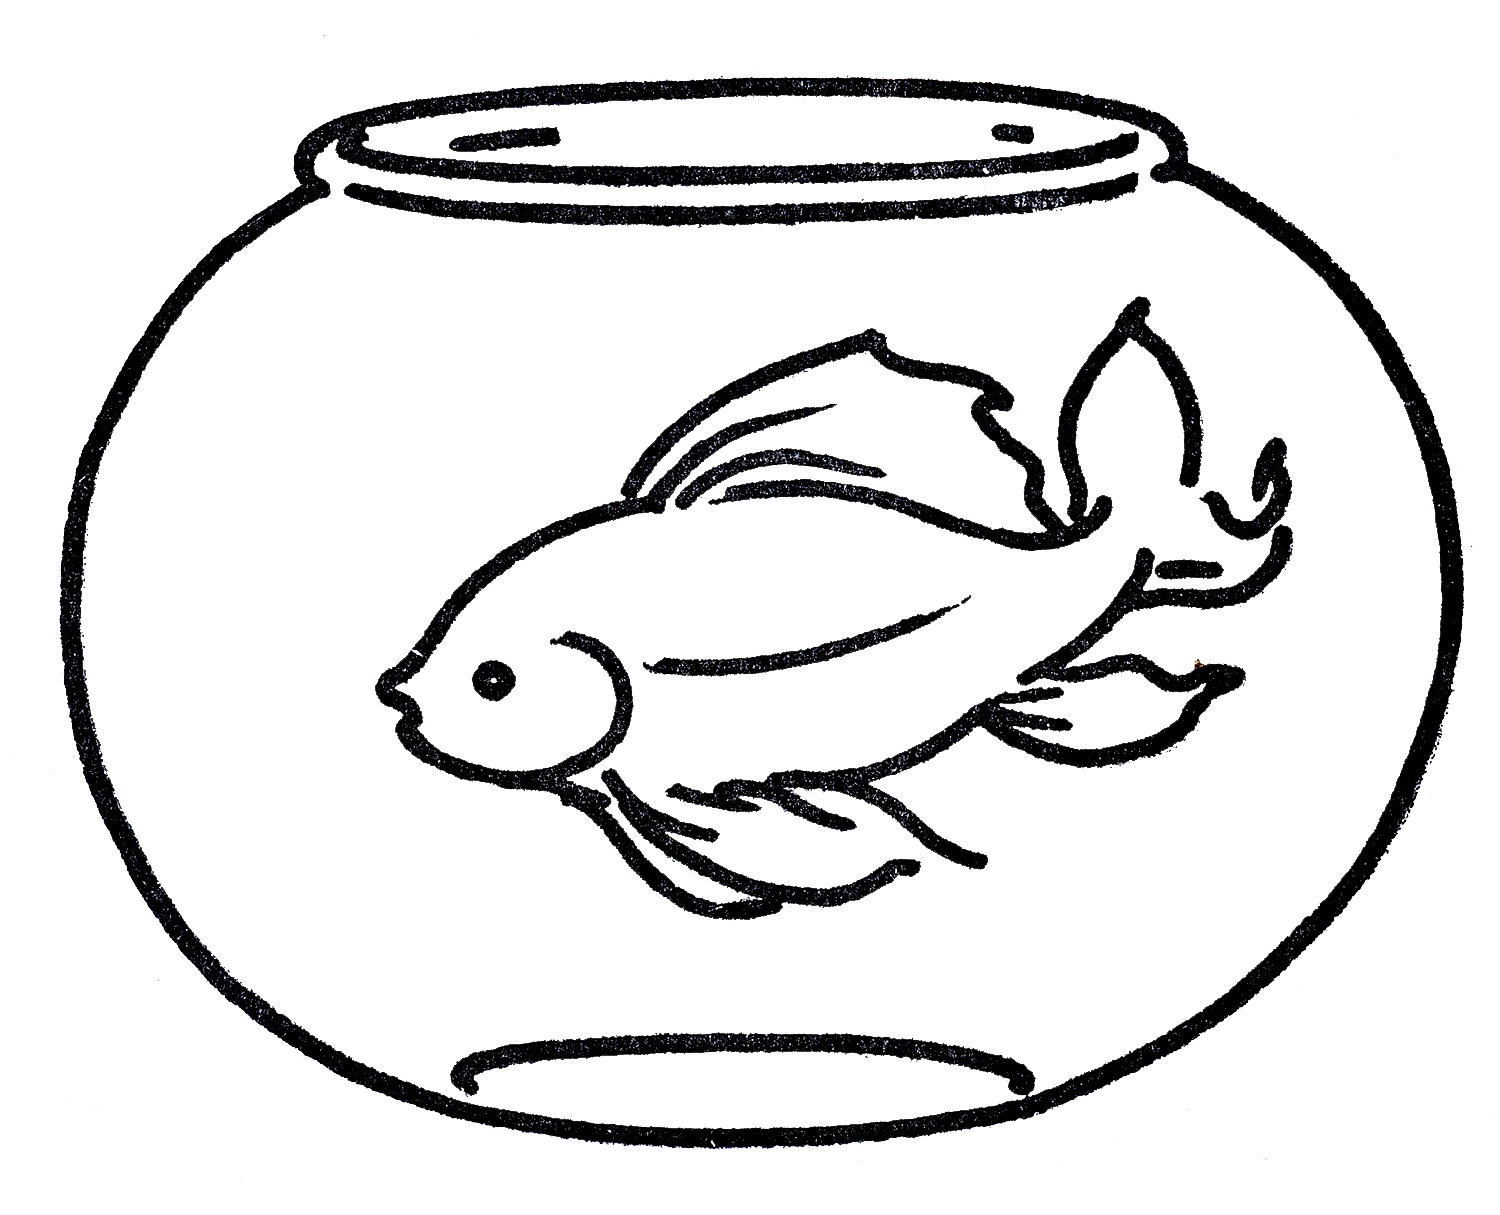 Bowl clipart coloring page. Free goldfish in line